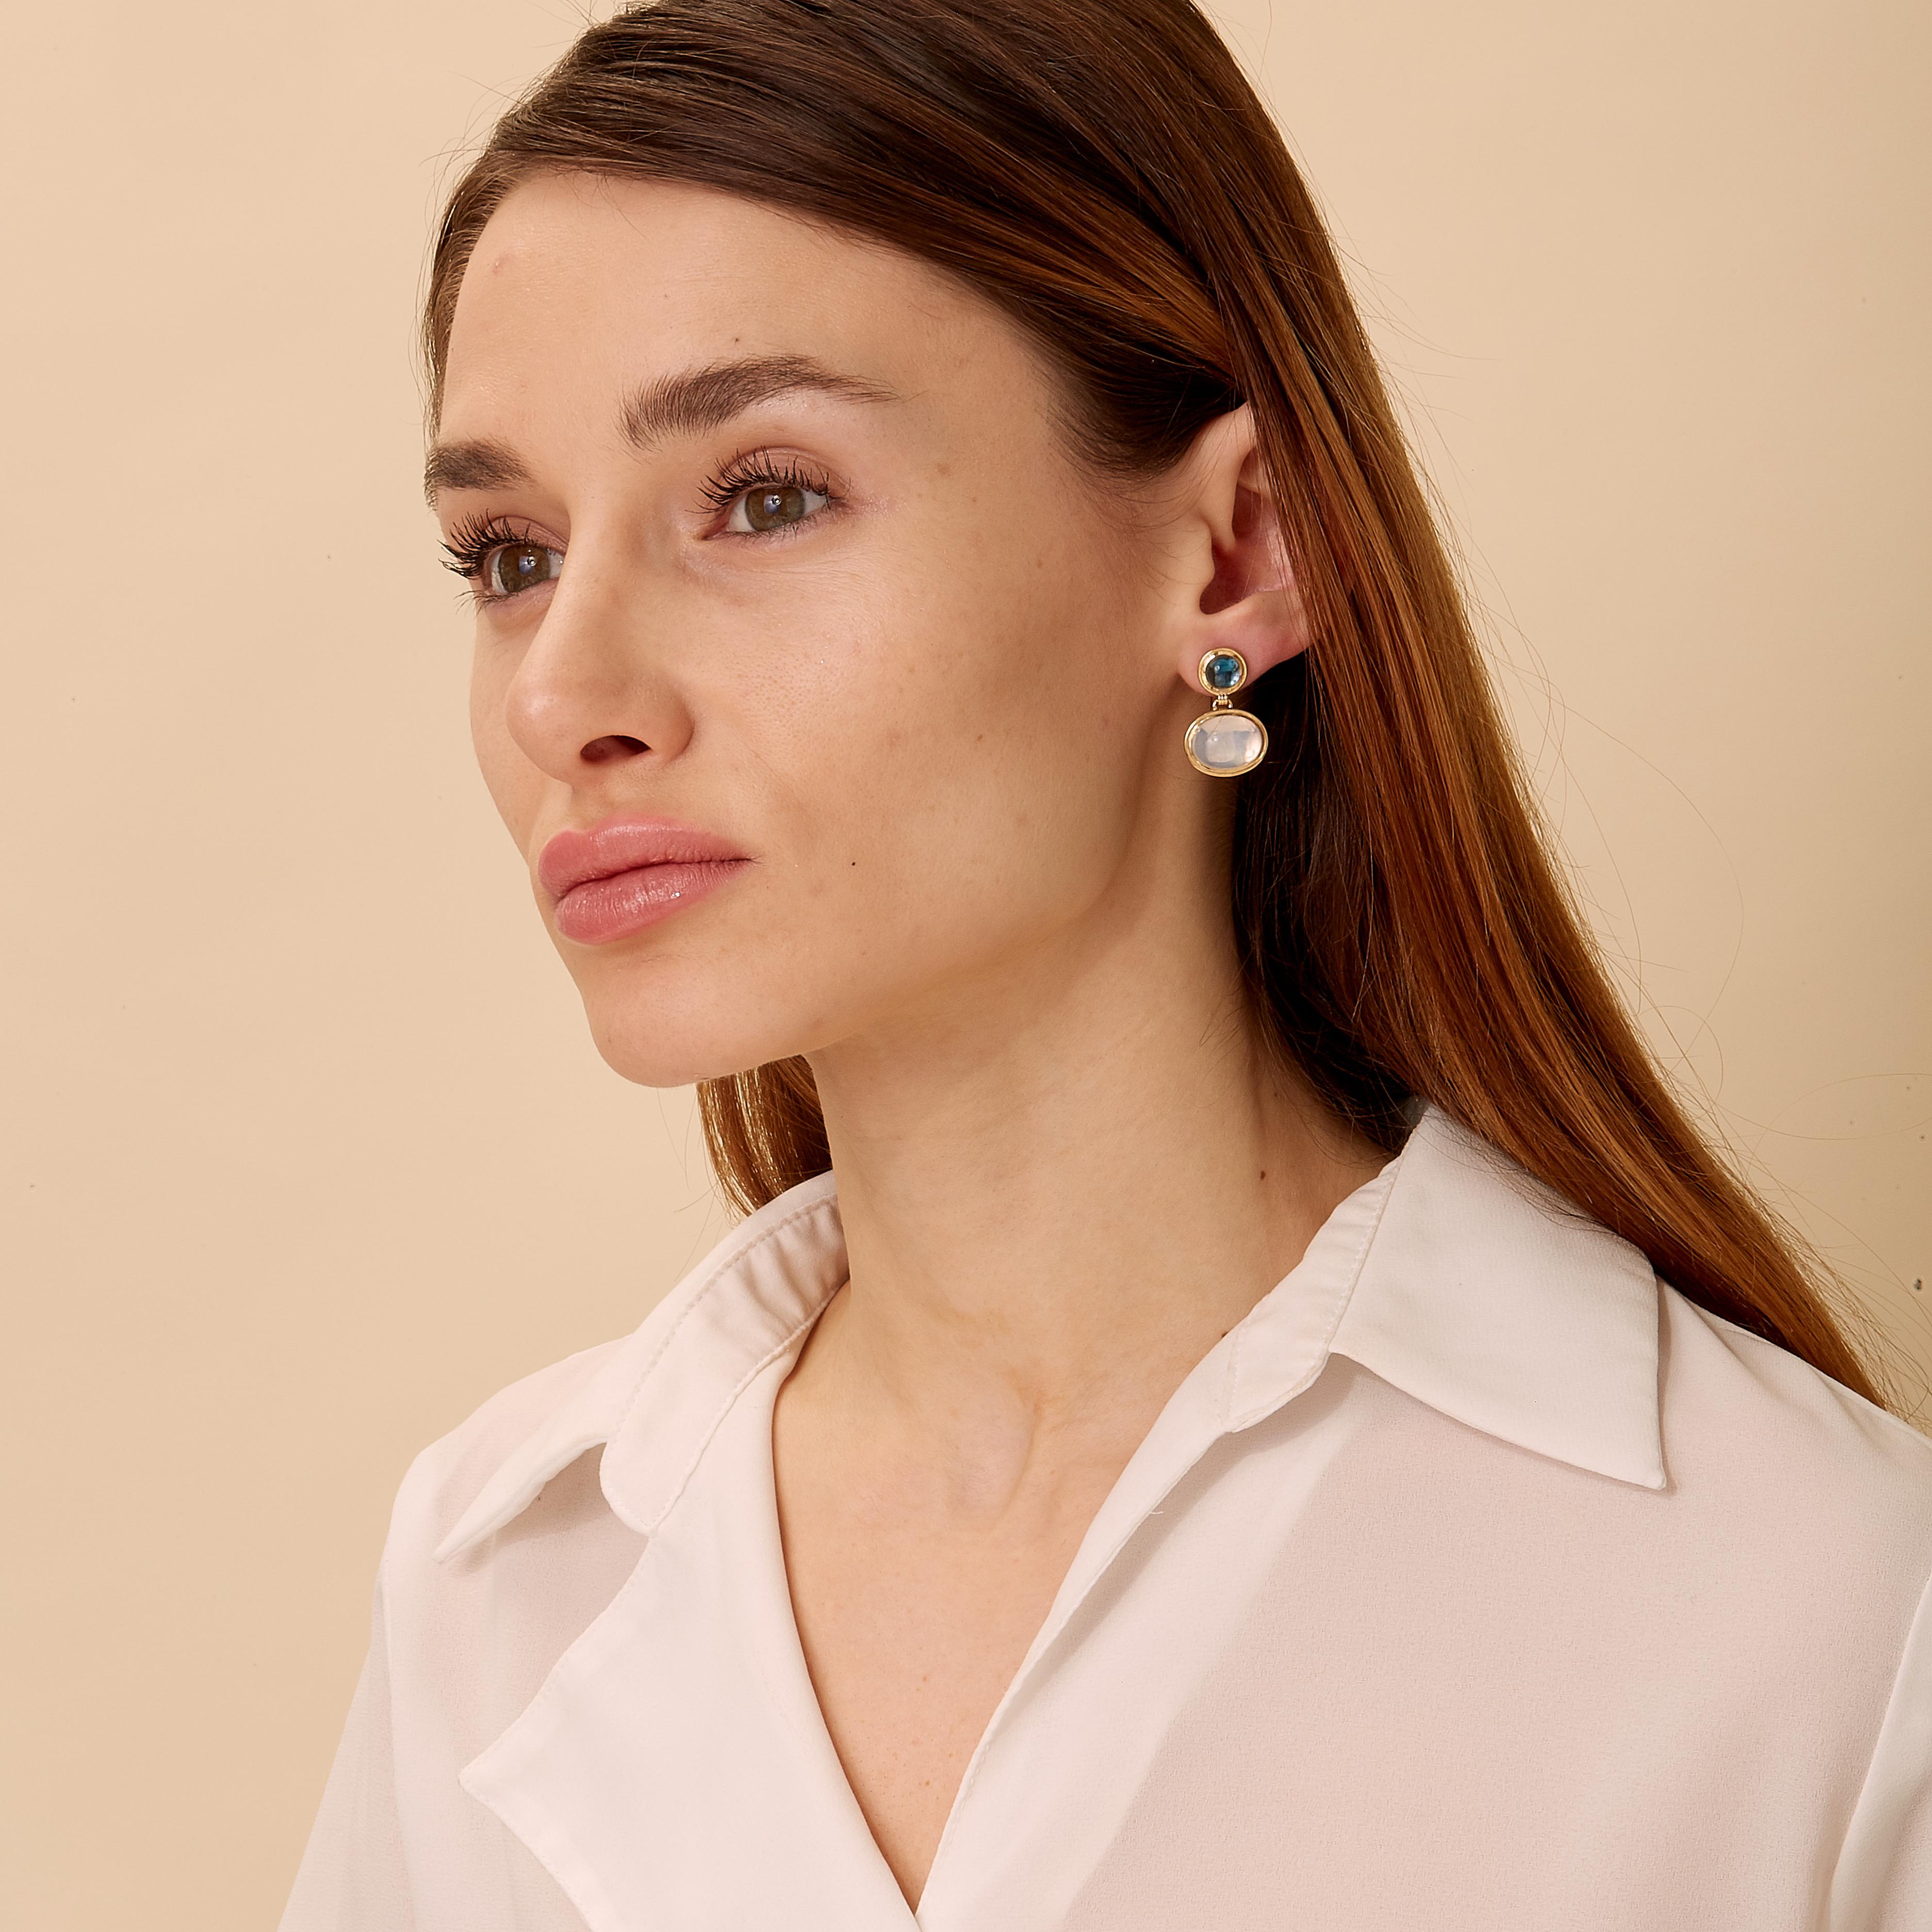 Created in 18 karat yellow gold
London Blue Topaz 3.5 carats approx.
Moon quartz 11 carats approx.
Limited Edition

Behold these exquisite earrings crafted from 18 karat yellow gold, featuring mesmerizing Candy Blue Topaz and Moon Quartz totaling